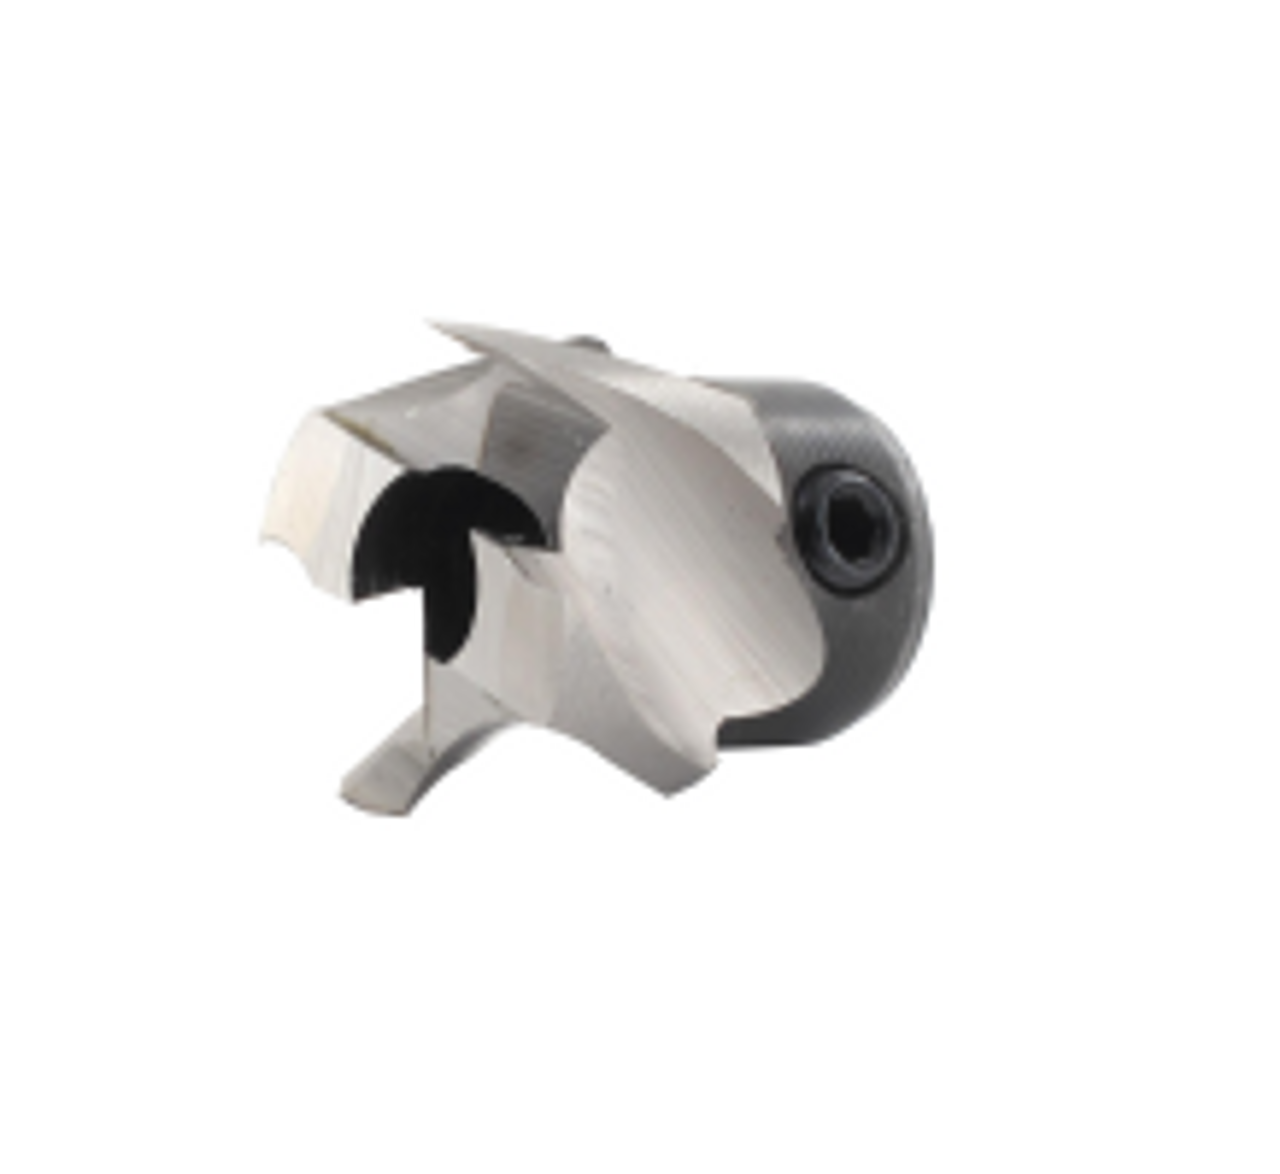 FAMAG Shell Countersinks | 2106 180° Countersink - Ø 25mm  with 11mm Drill for Bolt Recessing, CLT Installation to create a total tool solution for timber.